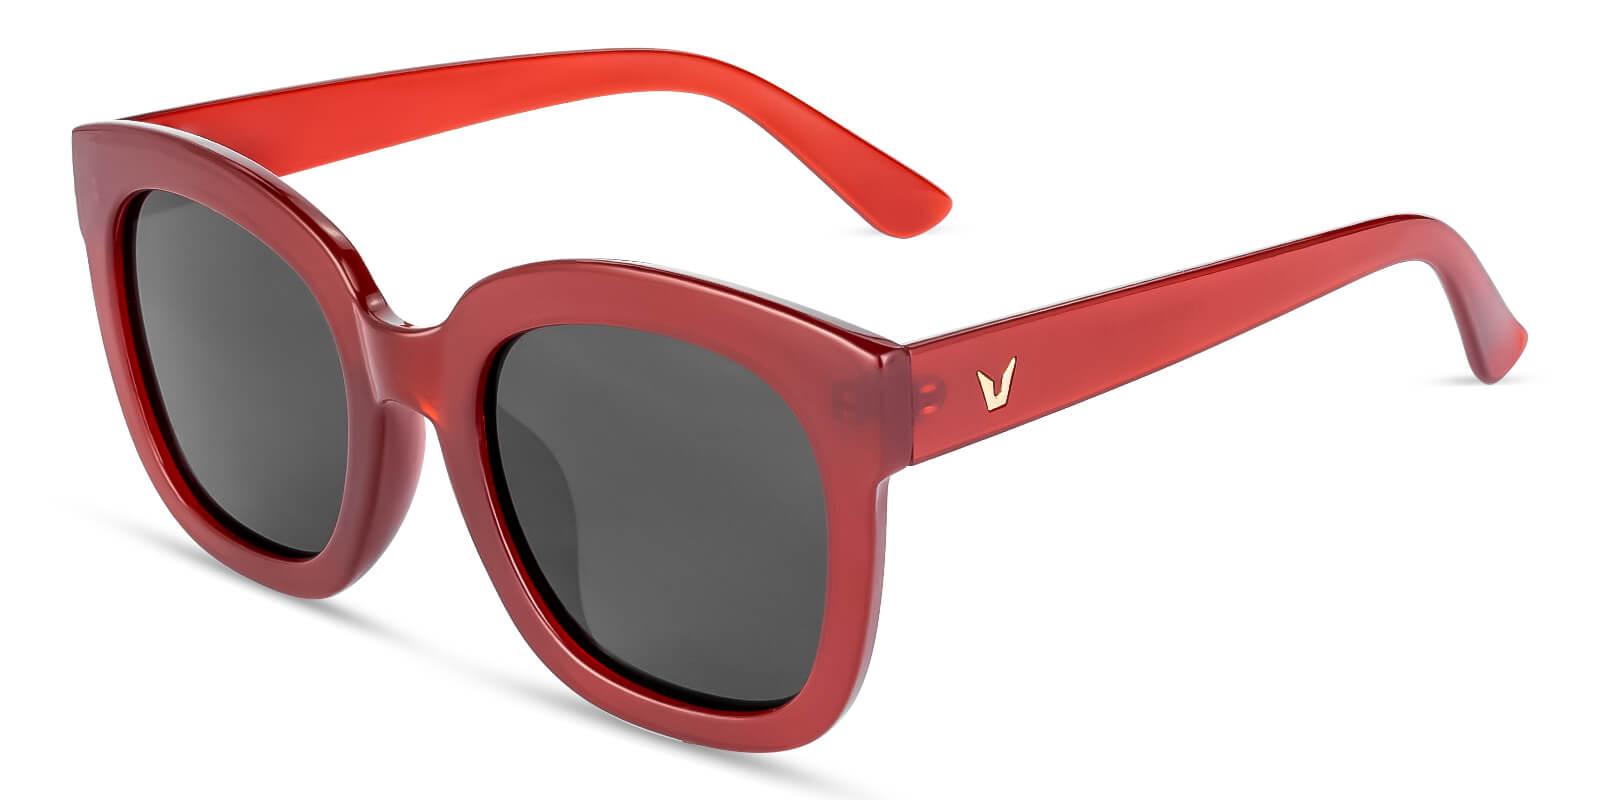 Kudos Red Plastic Fashion , Sunglasses Frames from ABBE Glasses